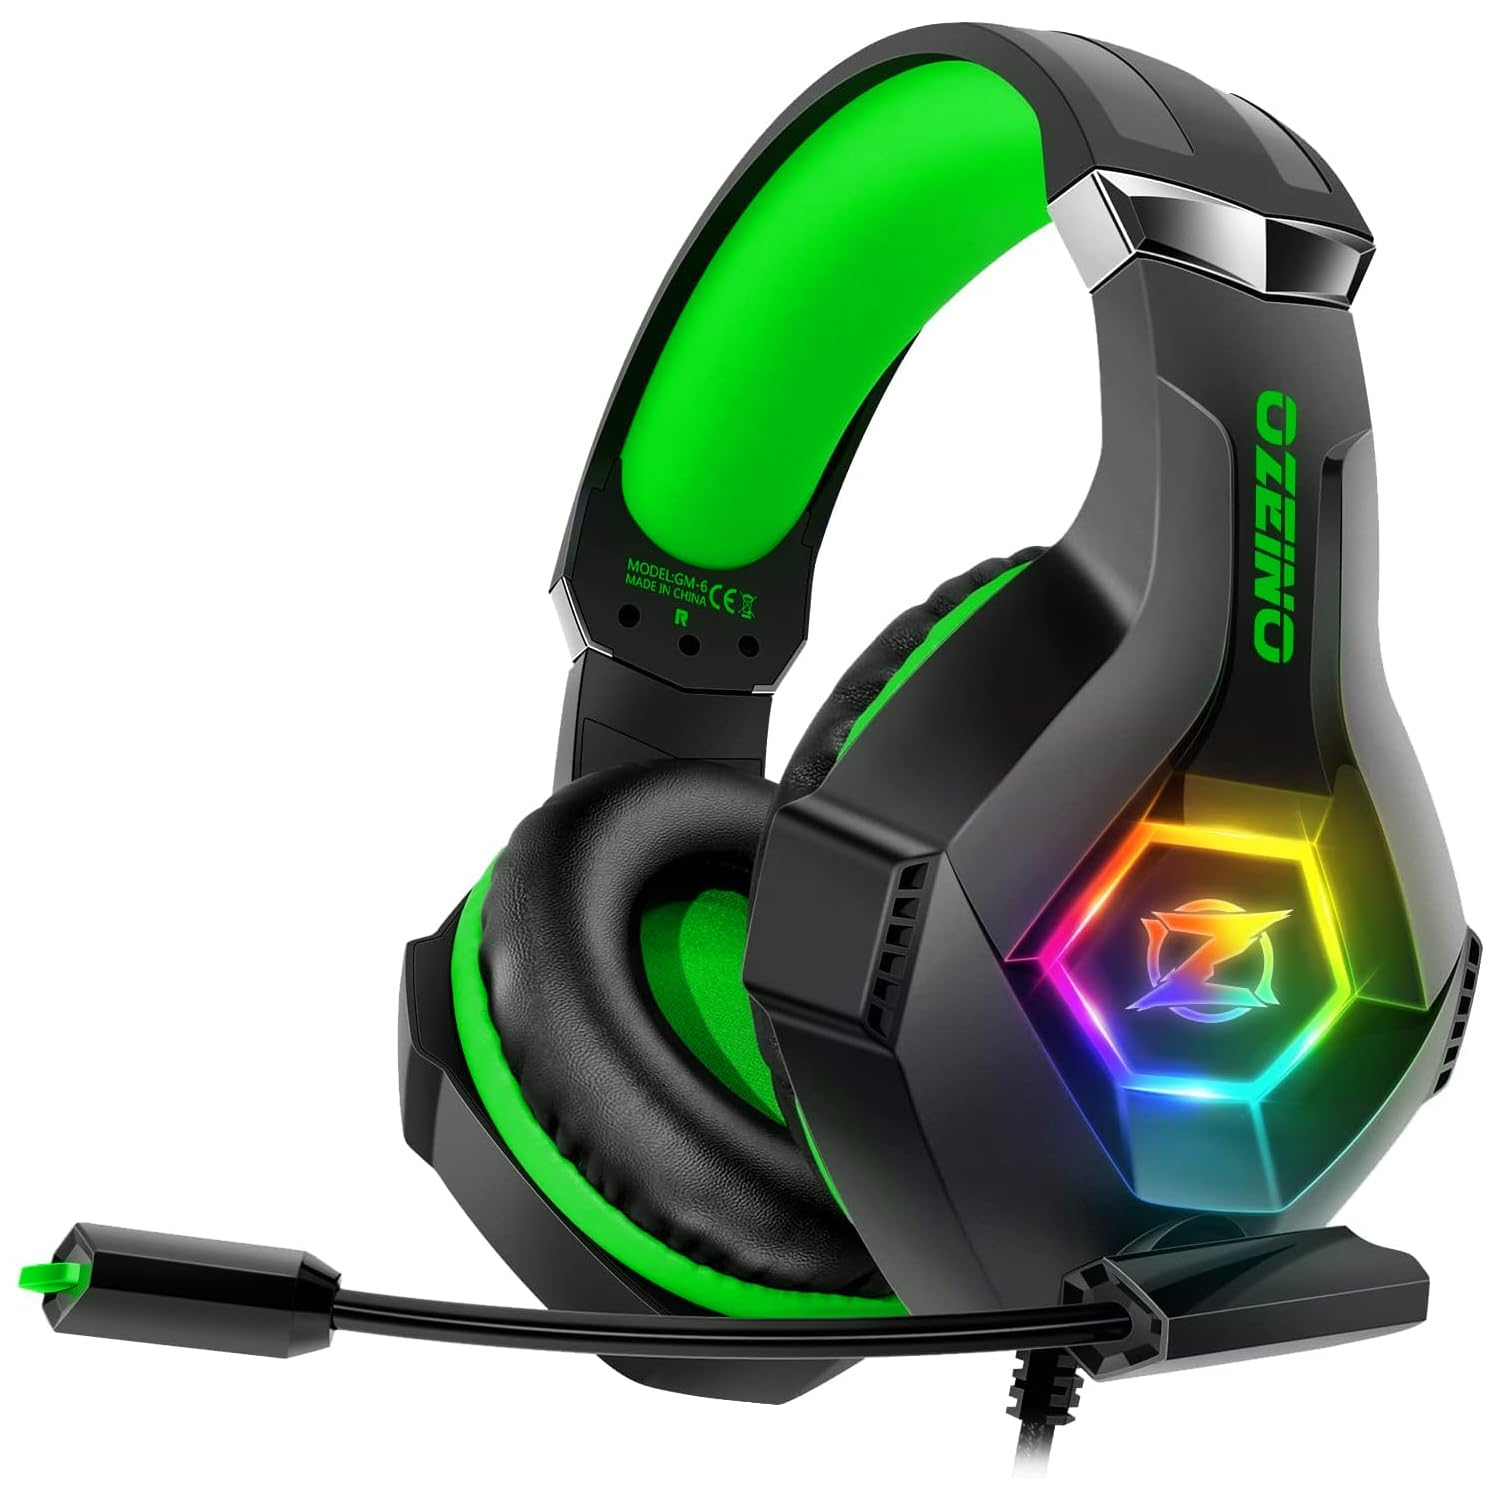 Ozeino Gaming Headset for PC, PS4, PS5, Xbox Headset, Gaming Headphones with Noise Cancelling Flexible Mic RGB Light Memory Earmuffs for Xbox one, Switch, Mac -Green